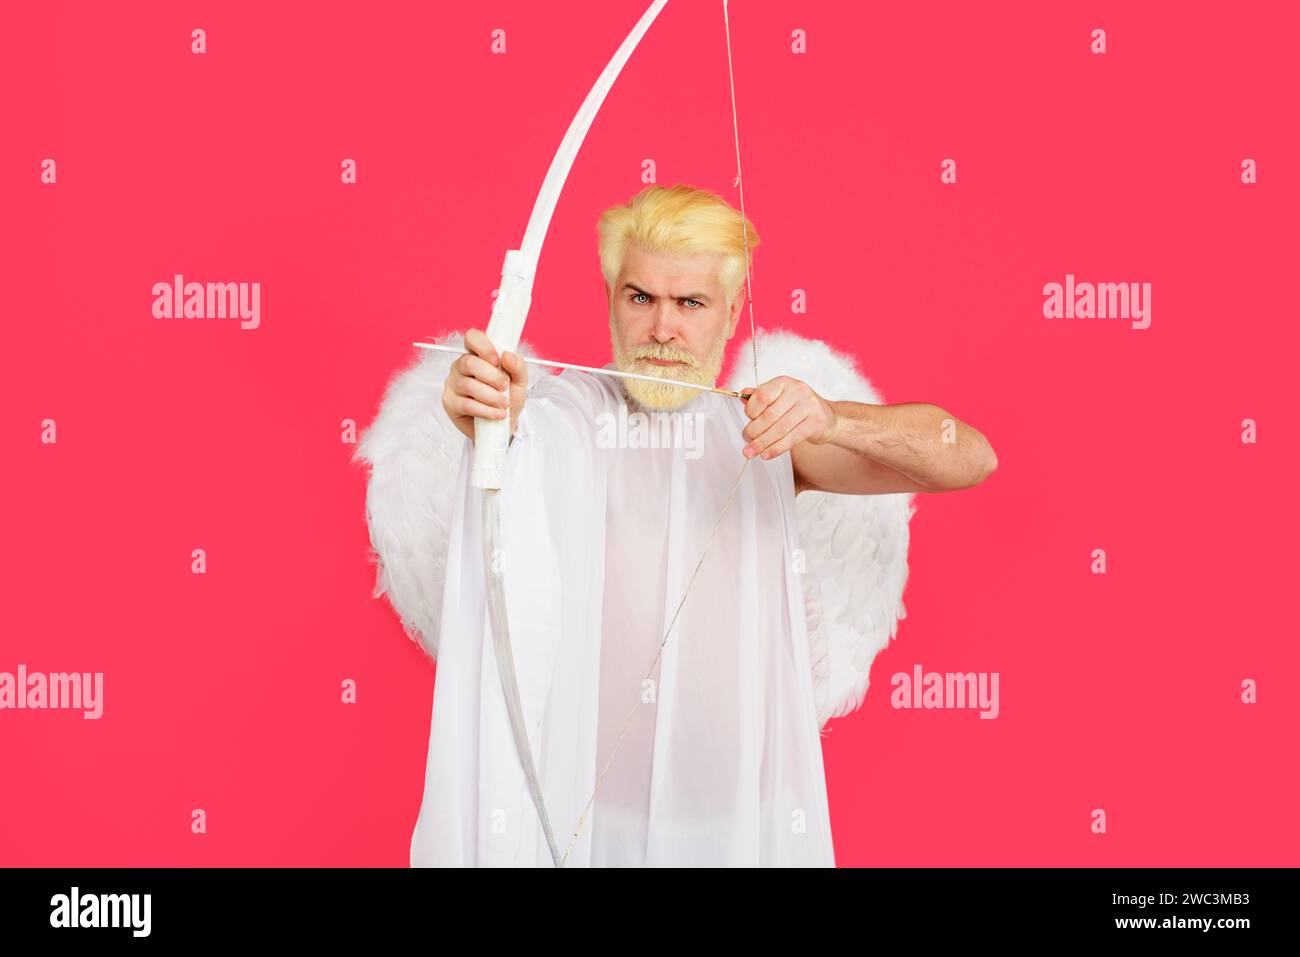 Valentines day celebration. Male cupid in angel wings shoots at target with arrow. God of love. Valentine cupid angel shooting arrows of love. Serious Stock Photo